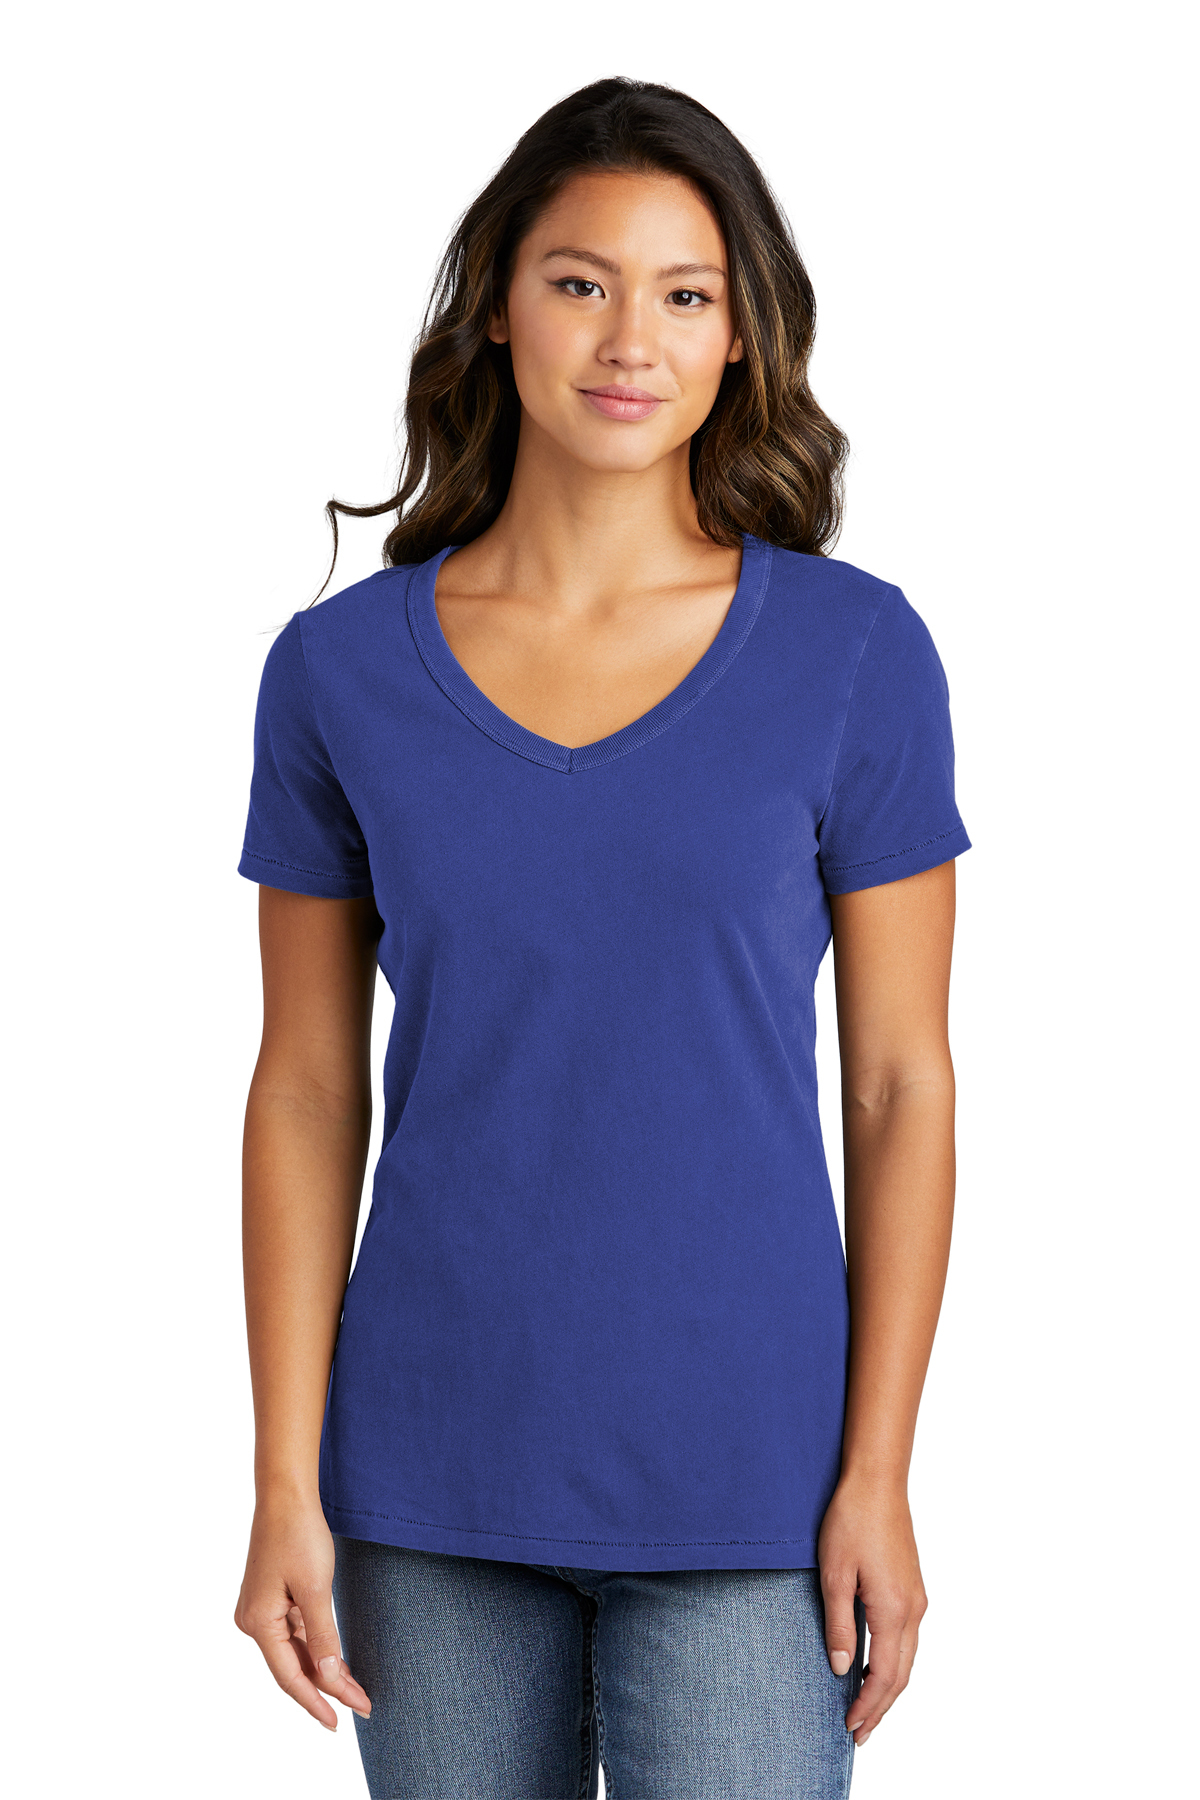 Port & Company Ladies Beach Wash ® Garment-Dyed V-Neck Tee | Product ...